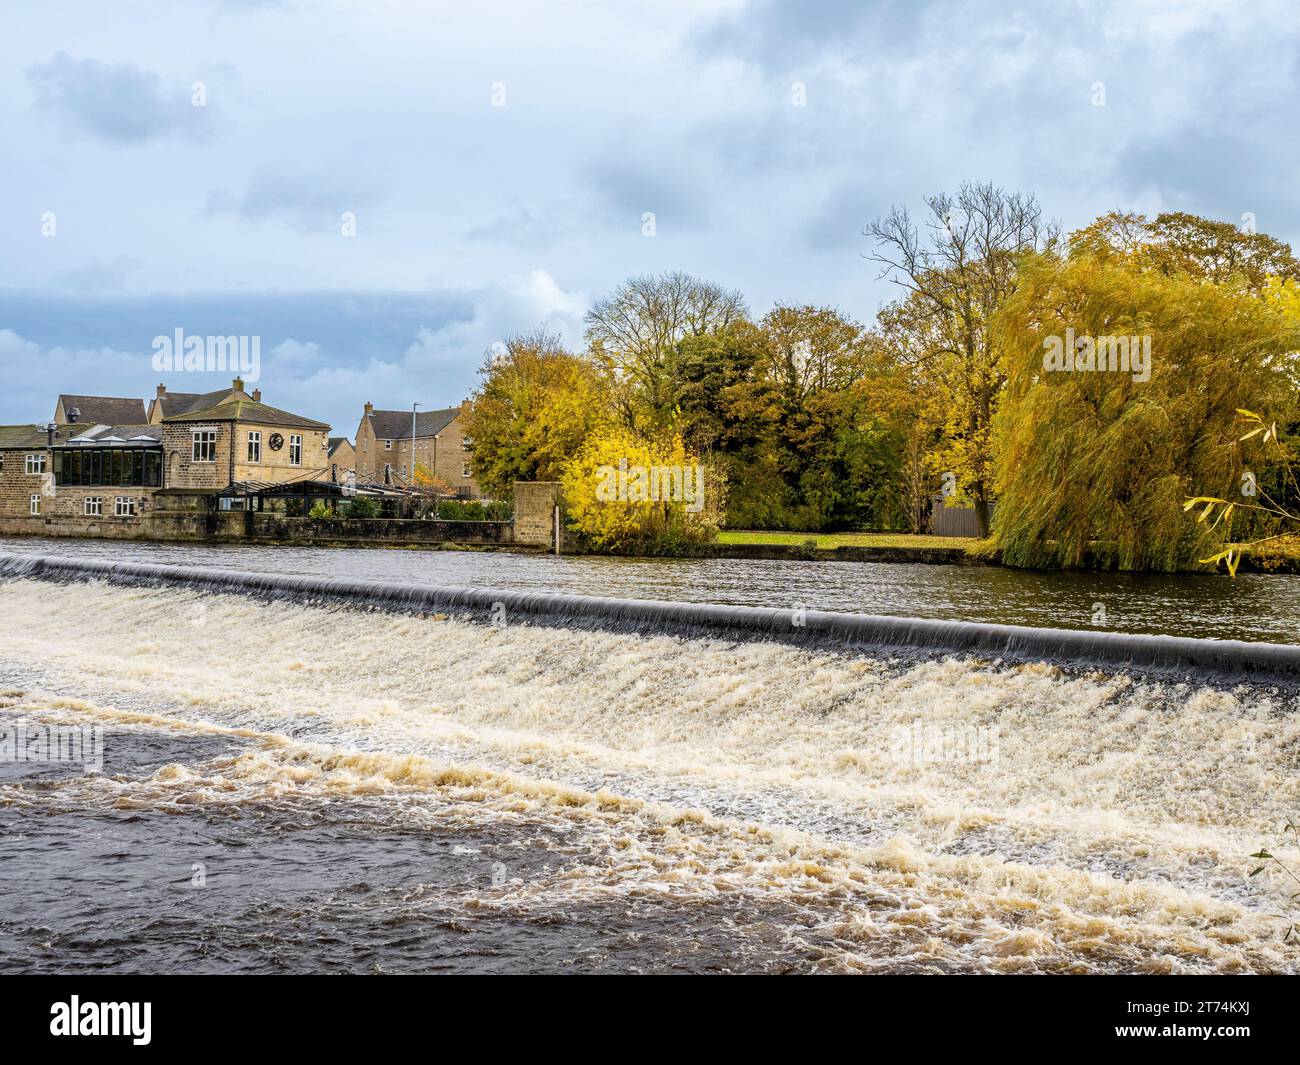 Weir on the River Wharfe in Otley, with Buon Apps restaurant seen in Autumn. UK Stock Photo